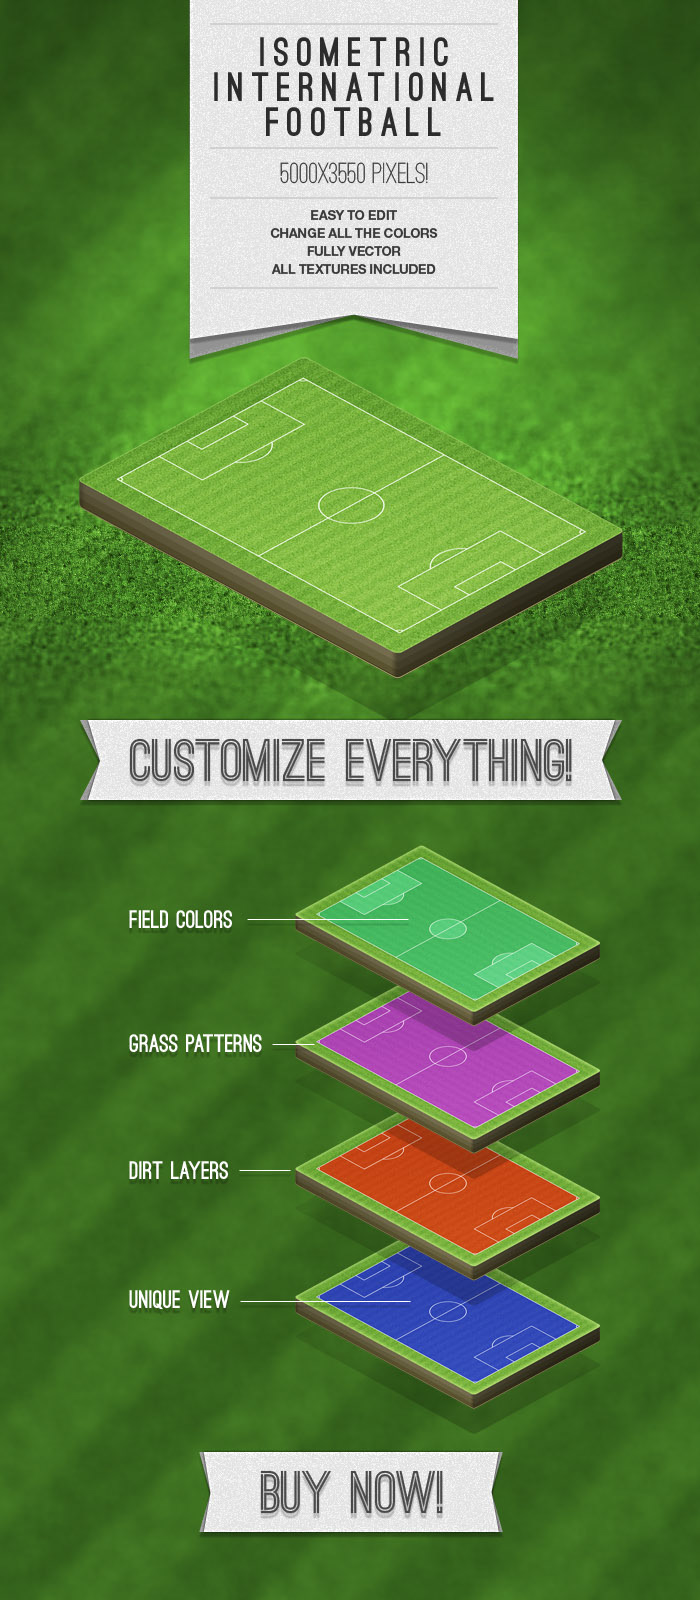 soccer football International Isometric field pitch game overtime Competition competitive match Smart smart object photoshop 3D league sport sports trophy champion winner green grass dirt texture